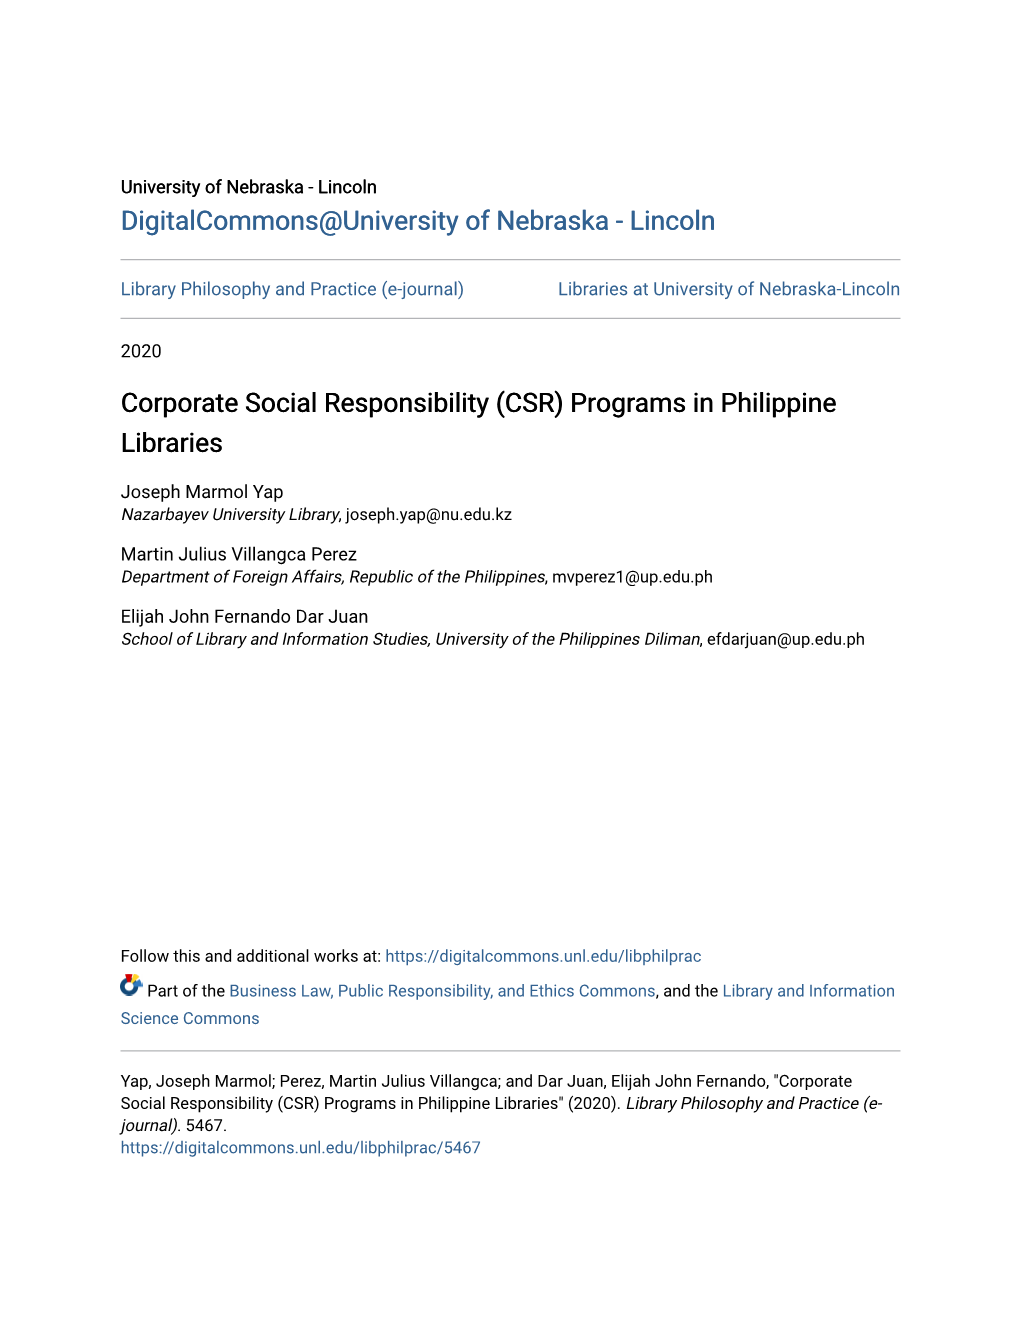 Corporate Social Responsibility (CSR) Programs in Philippine Libraries